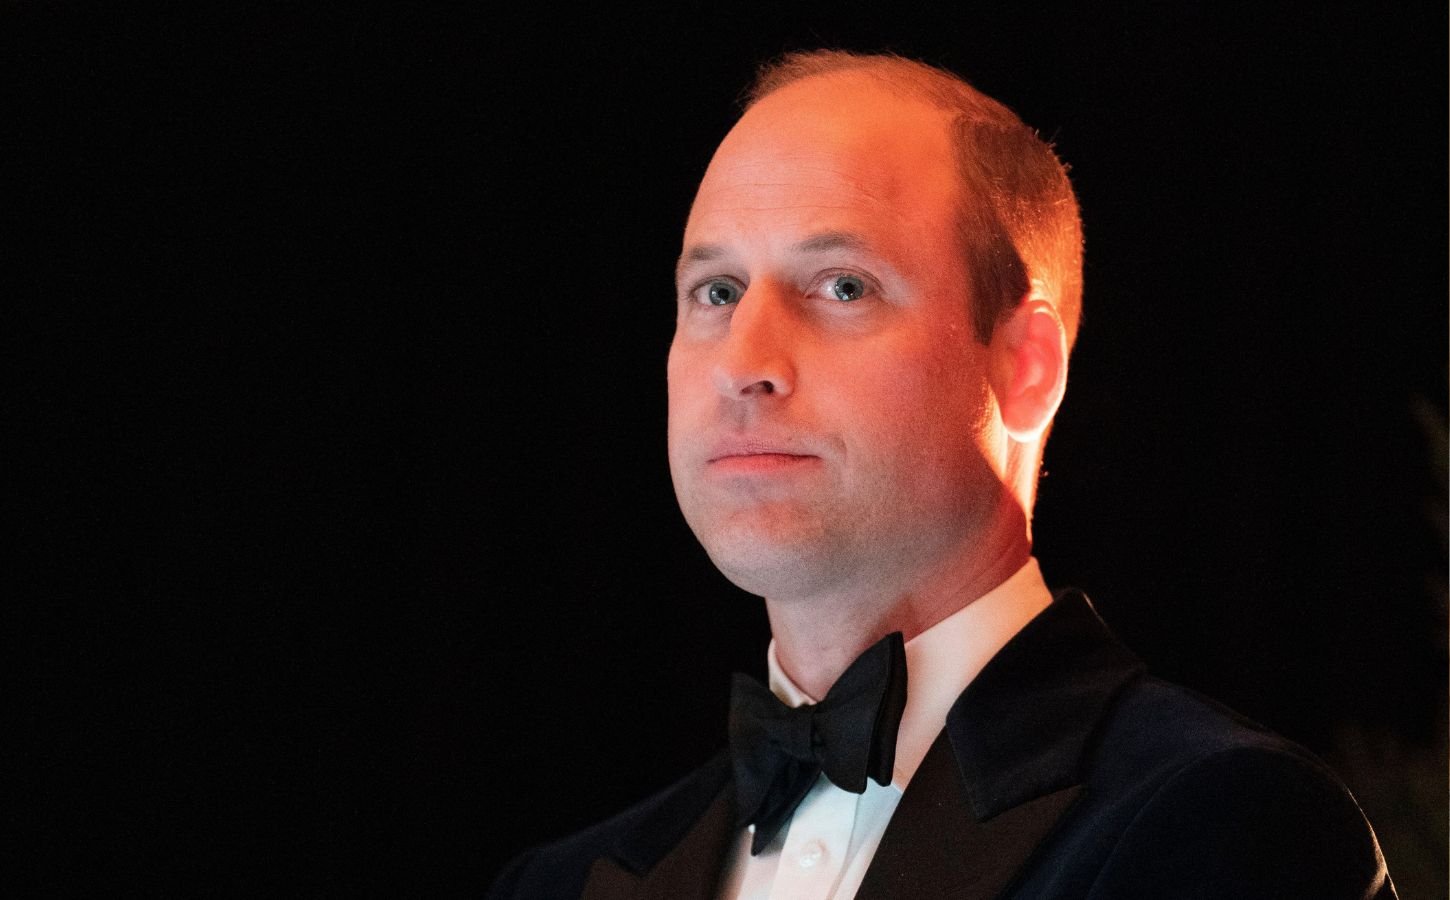 Prince William at the Earthshot Prize ceremony, an annual awards focusing on the environment